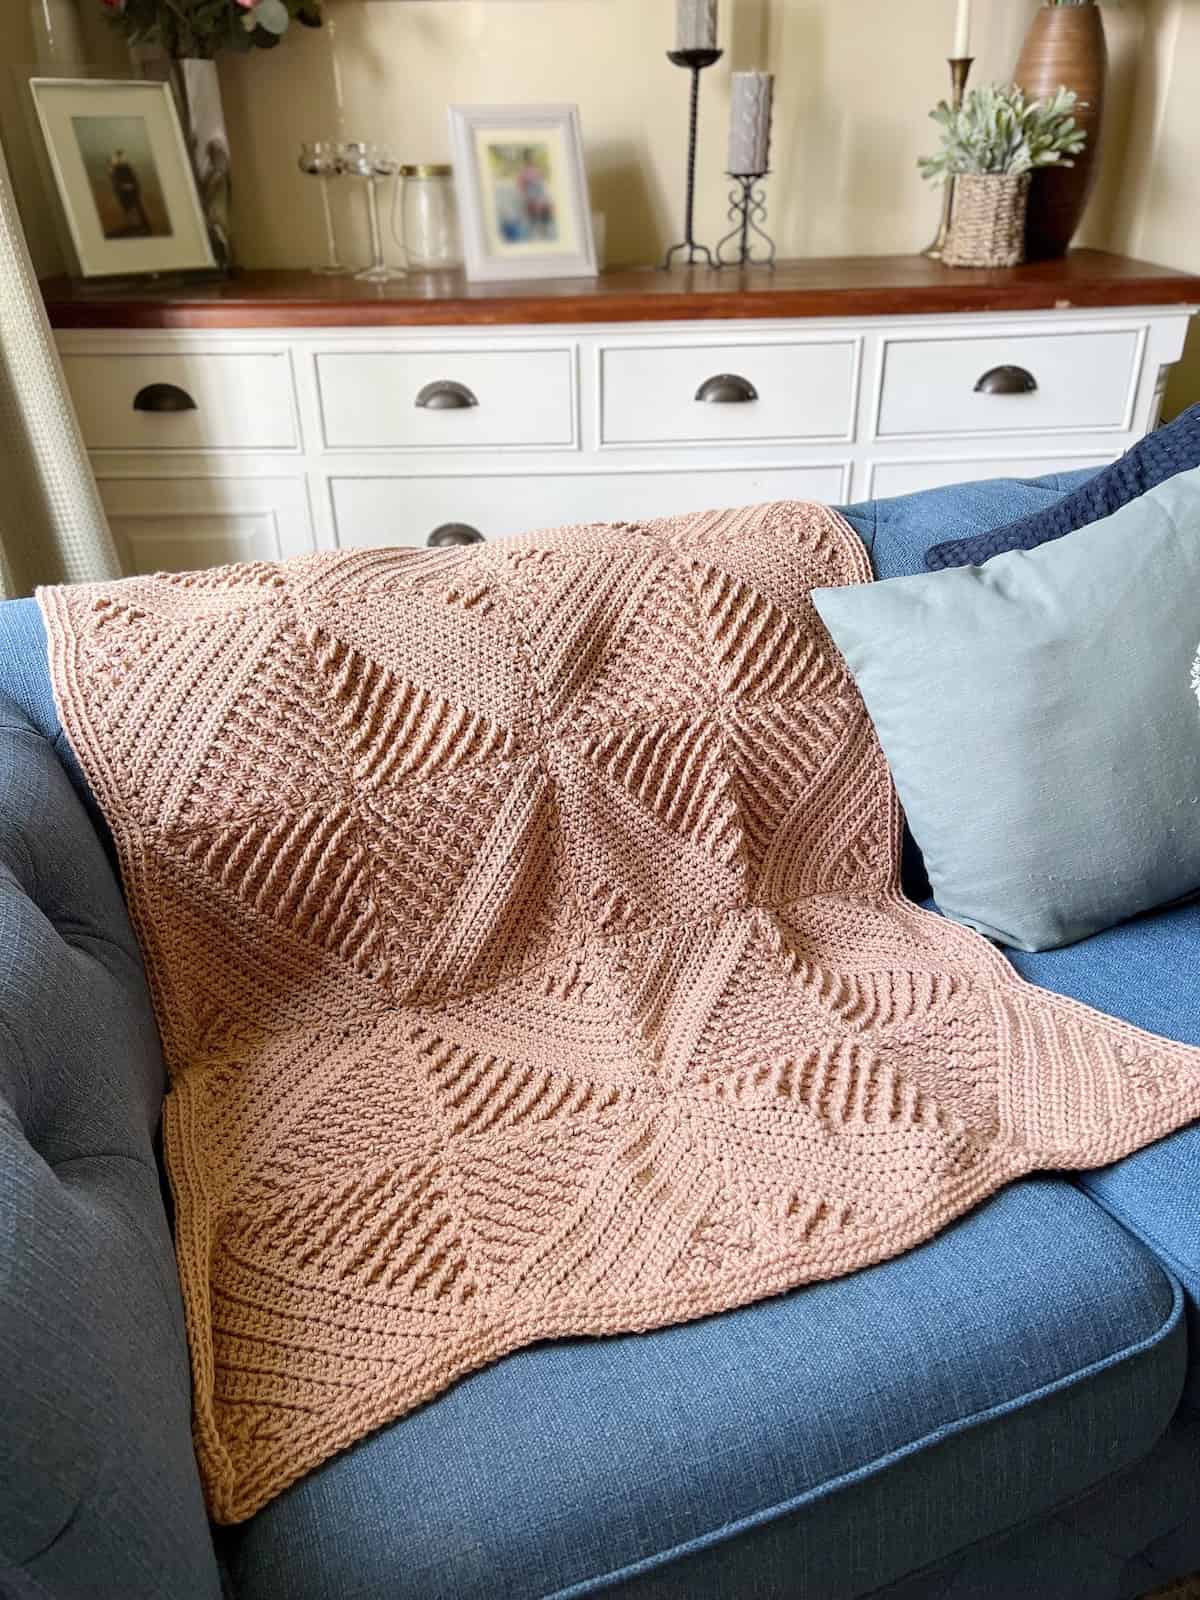 Textured crochet blanket laid over a sofa.